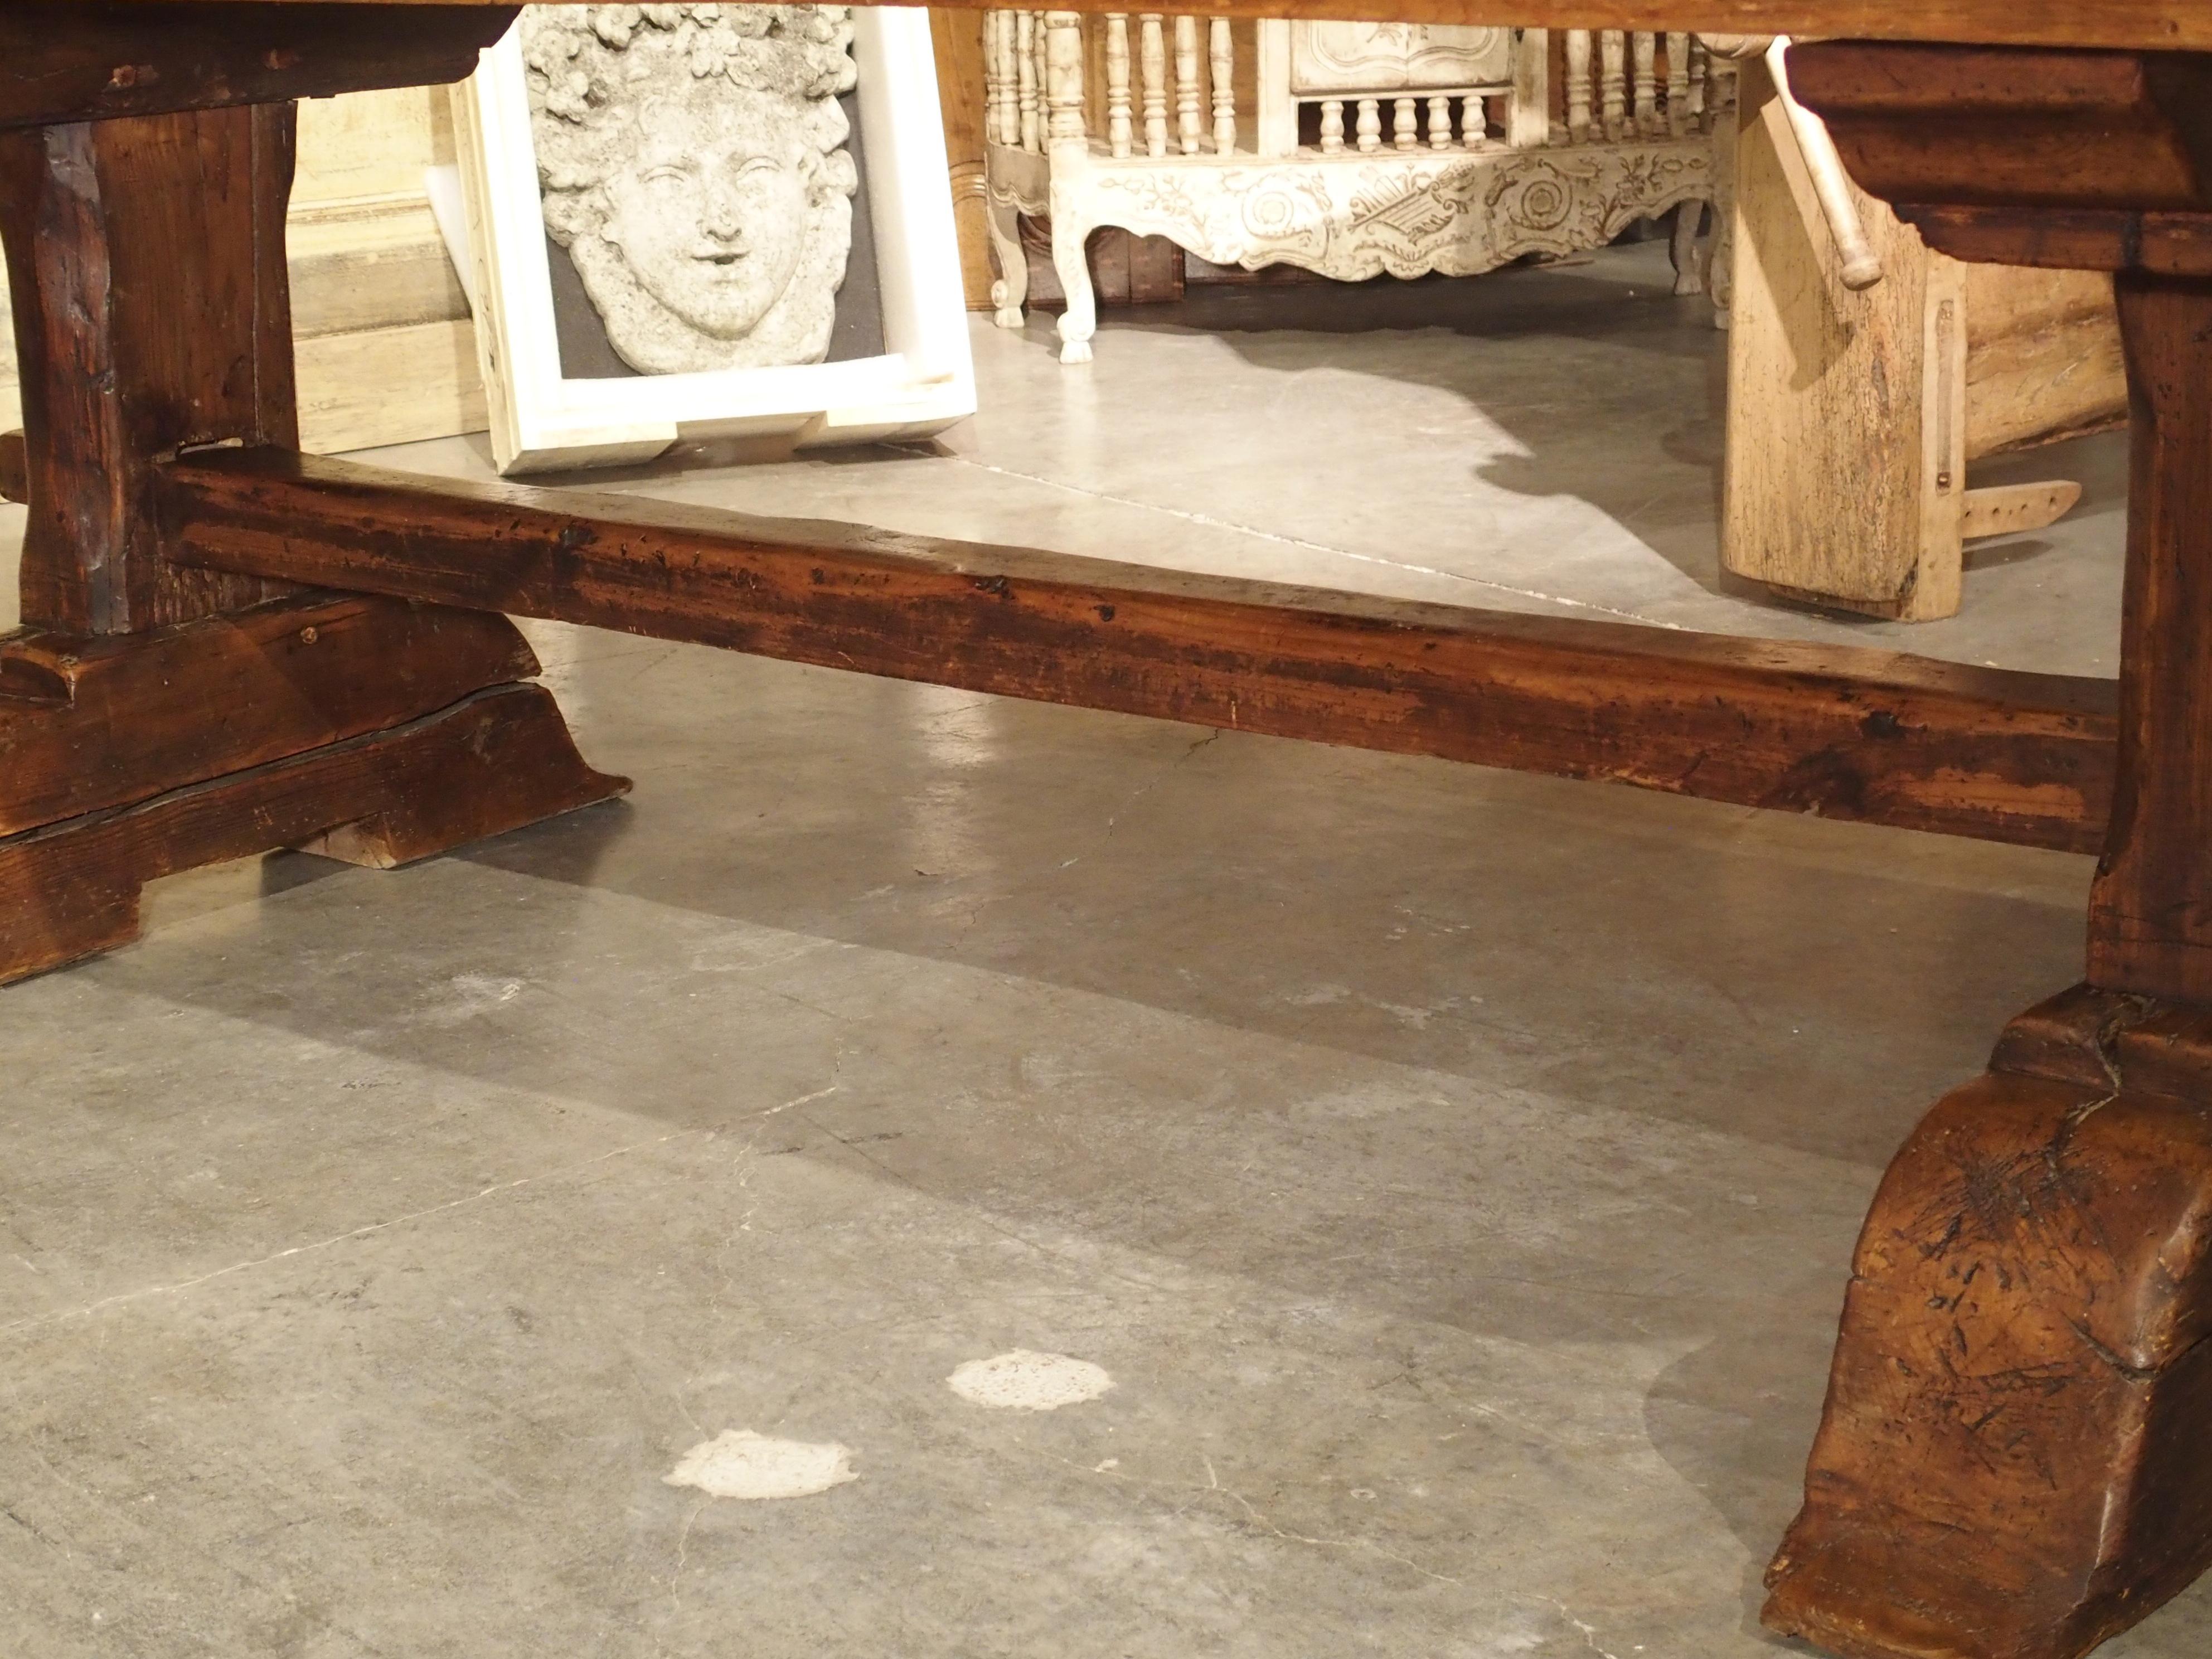 Hand-Carved 18th Century Single Plank Monastery Table from La Savoie, France